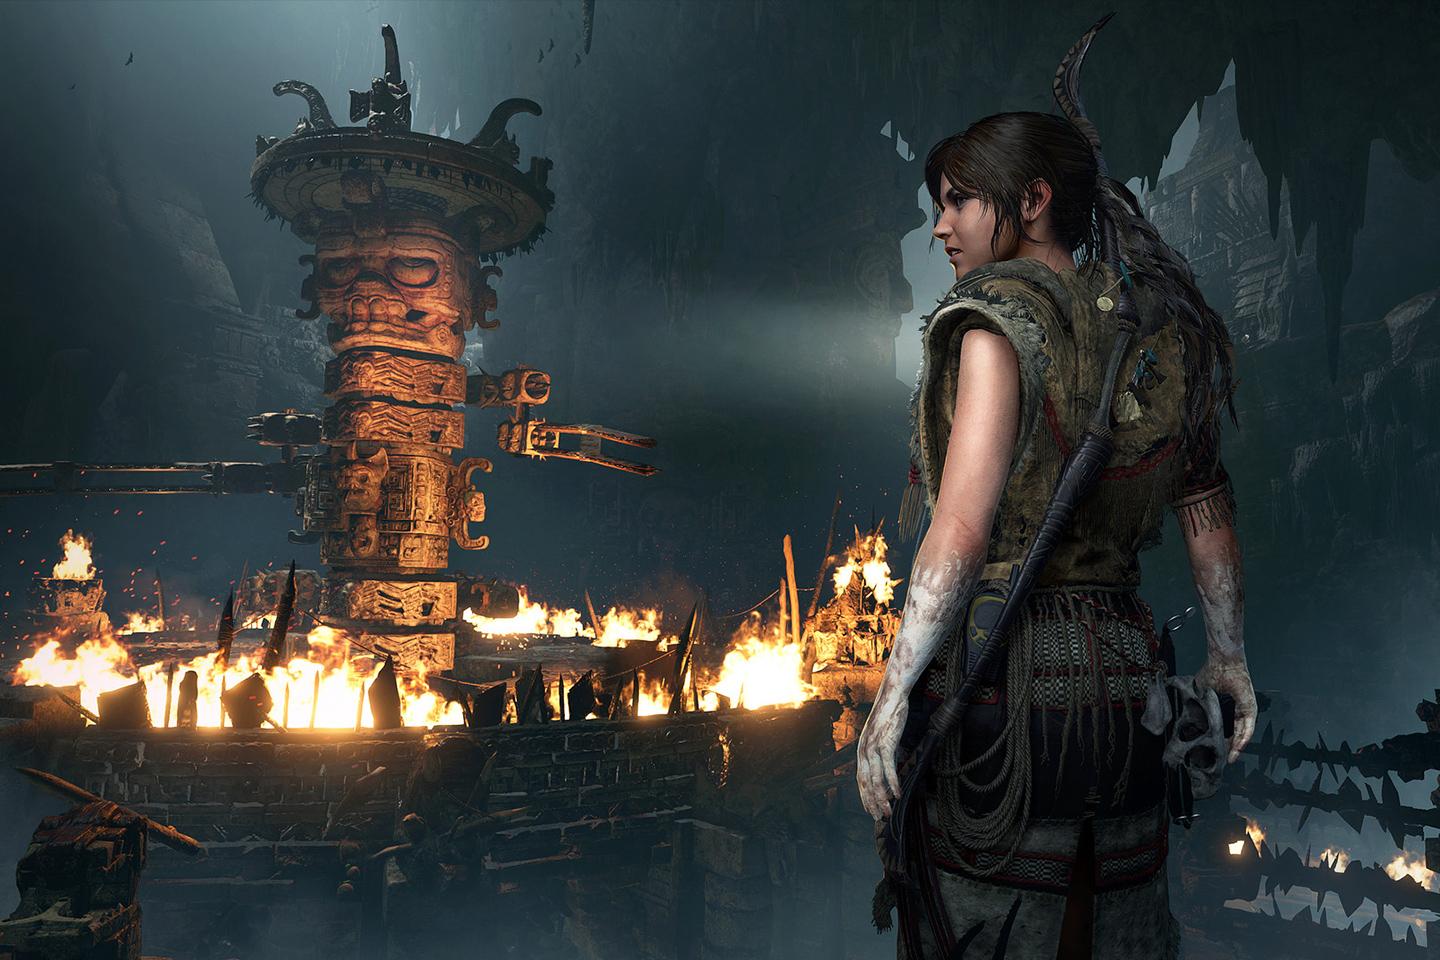 A moody in-game image from a Tomb Raider game capturing Lara Croft in tribal gear, gazing at a distant ritual site with lit torches and an ornate tower, set in an atmospheric cave.